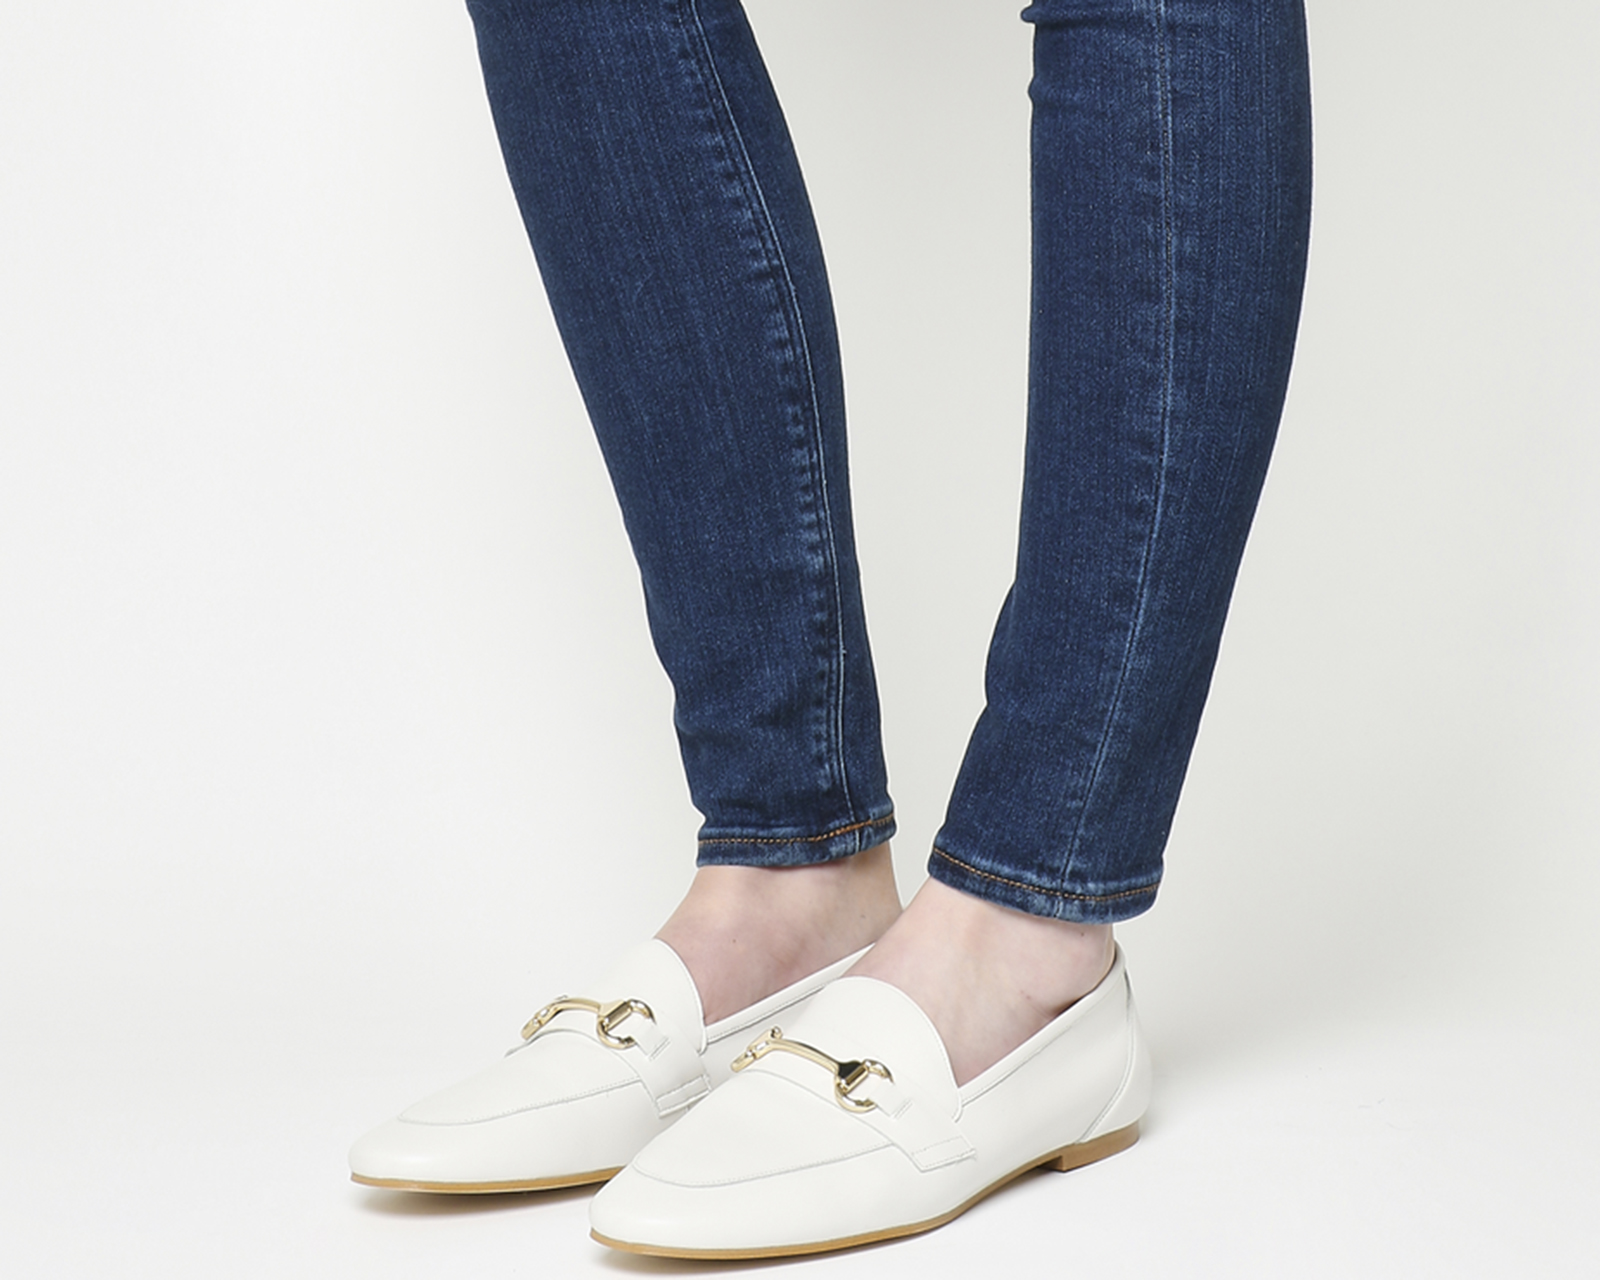 OFFICEDestiny Trim LoaferOff White Leather